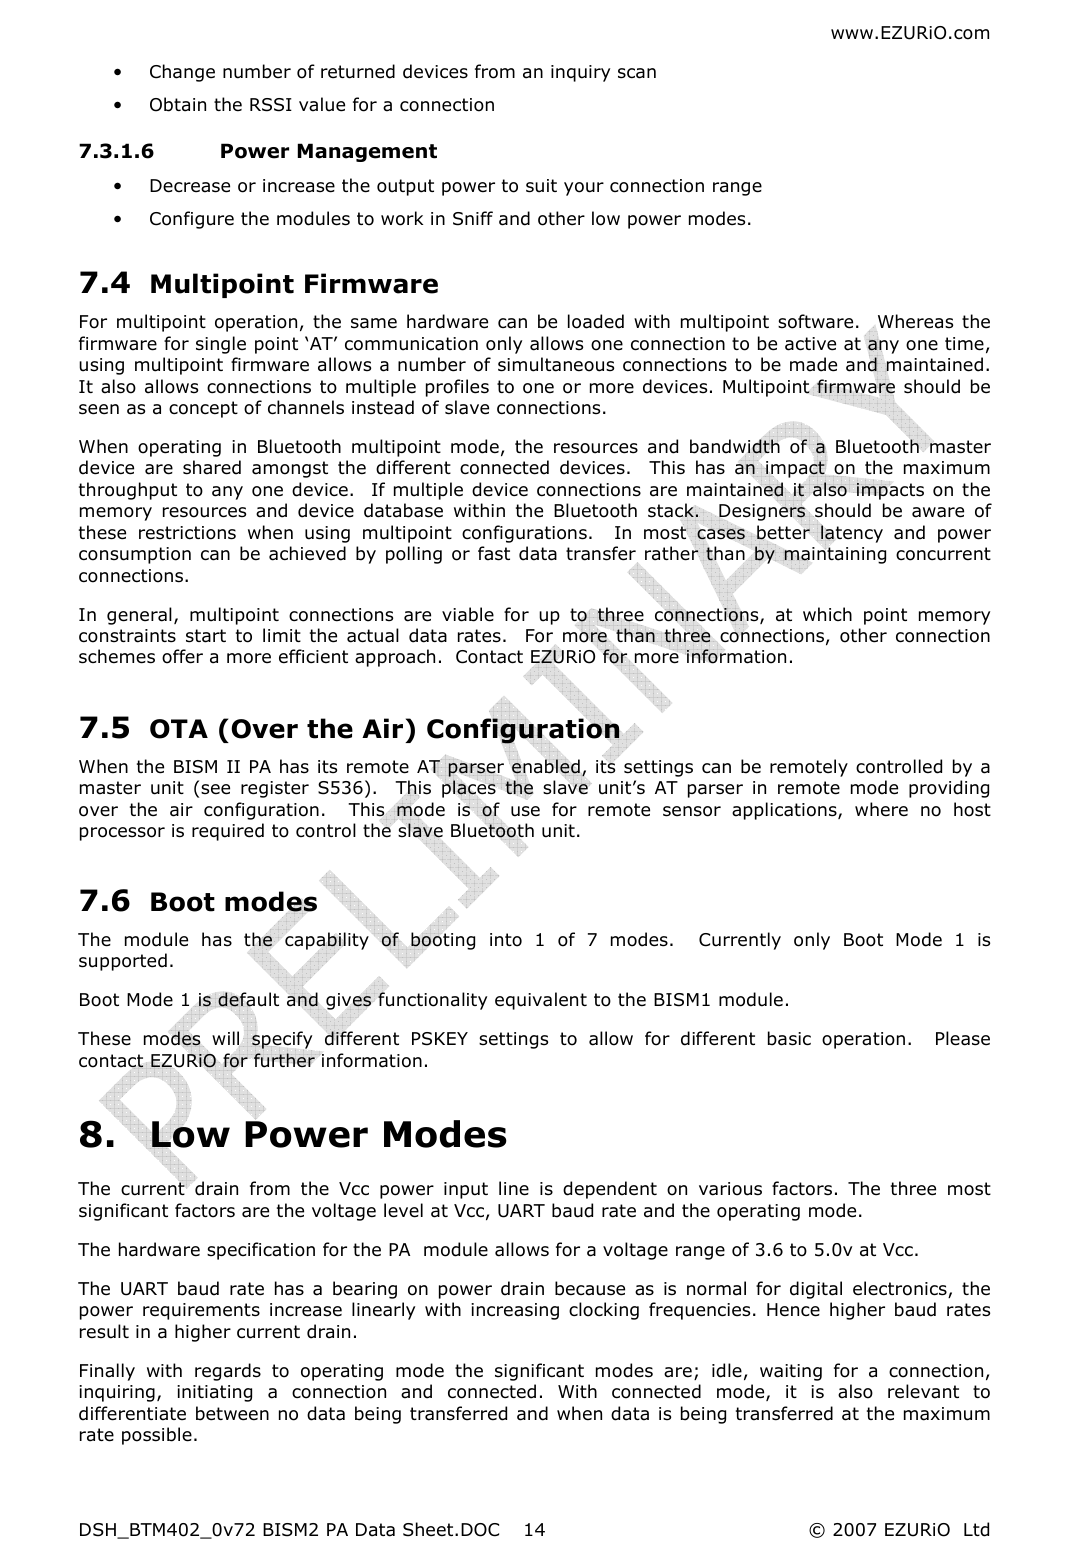 www.EZURiO.com DSH_BTM402_0v72 BISM2 PA Data Sheet.DOC  © 2007 EZURiO  Ltd  14• Change number of returned devices from an inquiry scan • Obtain the RSSI value for a connection 7.3.1.6 Power Management • Decrease or increase the output power to suit your connection range • Configure the modules to work in Sniff and other low power modes.  7.4 Multipoint Firmware For  multipoint  operation, the  same  hardware  can be loaded  with multipoint  software.    Whereas the firmware for single point ‘AT’ communication only allows one connection to be active at any one time, using multipoint firmware allows a number of simultaneous connections to be made and maintained. It also allows connections to multiple profiles to one or more devices. Multipoint firmware should be seen as a concept of channels instead of slave connections. When  operating  in  Bluetooth  multipoint  mode,  the  resources  and  bandwidth  of  a  Bluetooth  master device  are  shared  amongst  the  different  connected  devices.    This  has  an  impact  on  the  maximum throughput to any one device.   If multiple device connections are maintained it also impacts on the memory  resources  and  device  database  within  the  Bluetooth  stack.    Designers  should  be  aware  of these  restrictions  when  using  multipoint  configurations.    In  most  cases  better  latency  and  power consumption can be achieved by polling or fast data transfer rather than by maintaining concurrent connections. In  general,  multipoint  connections  are  viable  for  up  to  three  connections,  at  which  point  memory constraints  start  to  limit  the  actual  data  rates.    For  more  than three  connections,  other  connection schemes offer a more efficient approach.  Contact EZURiO for more information. 7.5 OTA (Over the Air) Configuration When the BISM II PA has its remote AT parser enabled, its settings can be remotely controlled by a master  unit  (see  register  S536).    This  places  the  slave  unit’s  AT  parser  in  remote  mode  providing over  the  air  configuration.    This  mode  is  of  use  for  remote  sensor  applications,  where  no  host processor is required to control the slave Bluetooth unit. 7.6 Boot modes The  module  has  the  capability  of  booting  into  1  of  7  modes.    Currently  only  Boot  Mode  1  is supported. Boot Mode 1 is default and gives functionality equivalent to the BISM1 module. These  modes  will  specify  different  PSKEY  settings  to  allow  for  different  basic  operation.    Please contact EZURiO for further information. 8. Low Power Modes The  current  drain  from  the  Vcc  power  input  line  is  dependent  on  various  factors.  The  three  most significant factors are the voltage level at Vcc, UART baud rate and the operating mode. The hardware specification for the PA  module allows for a voltage range of 3.6 to 5.0v at Vcc.  The  UART  baud  rate  has  a  bearing  on  power  drain  because  as is  normal  for  digital  electronics, the power  requirements  increase  linearly  with  increasing  clocking  frequencies.  Hence  higher  baud  rates result in a higher current drain. Finally  with  regards  to  operating  mode  the  significant  modes  are;  idle,  waiting  for  a  connection, inquiring,  initiating  a  connection  and  connected.  With  connected  mode,  it  is  also  relevant  to differentiate between no data being transferred and when data is being transferred at the maximum rate possible. 